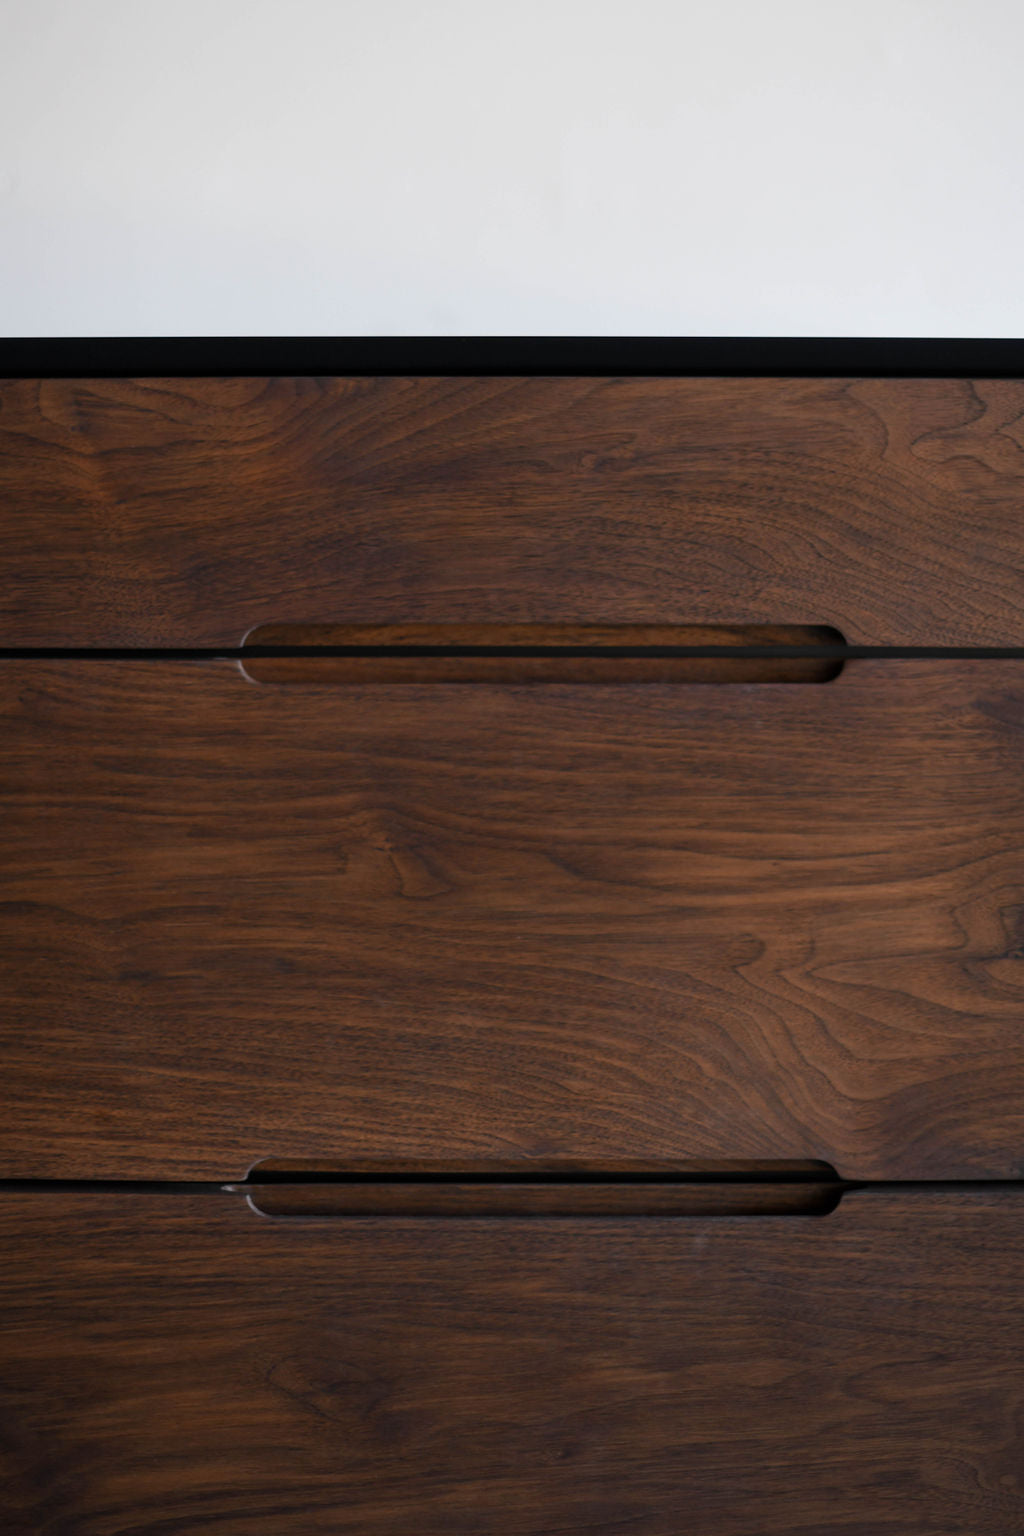 kings dresser - close up on wood drawers 